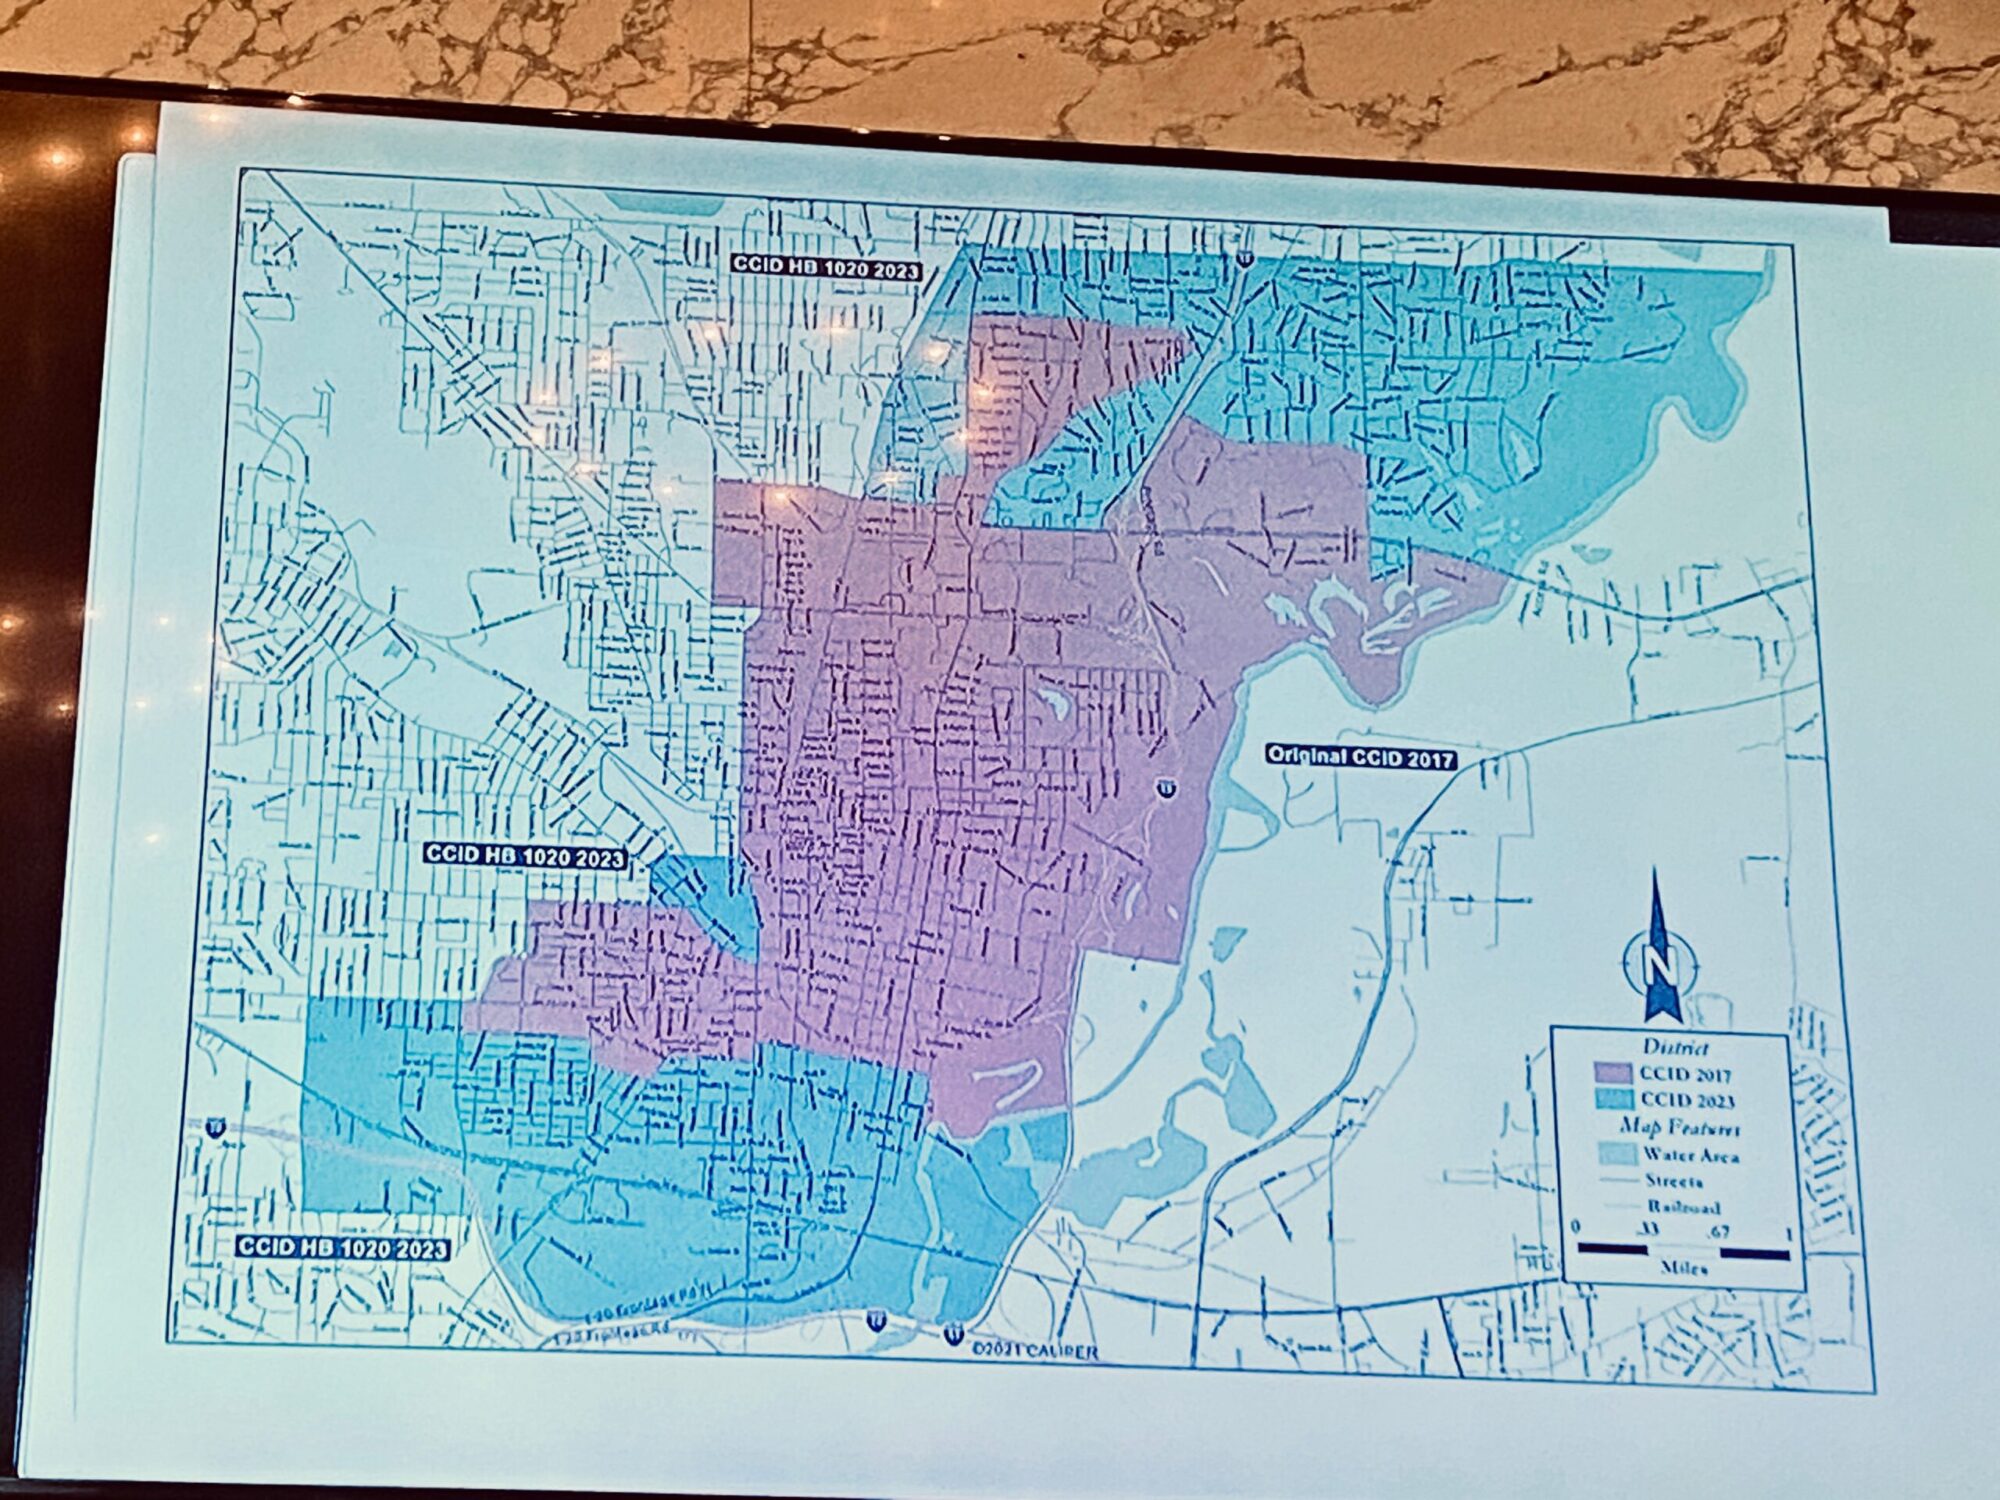 New proposed boundaries of the CCID in Jackson